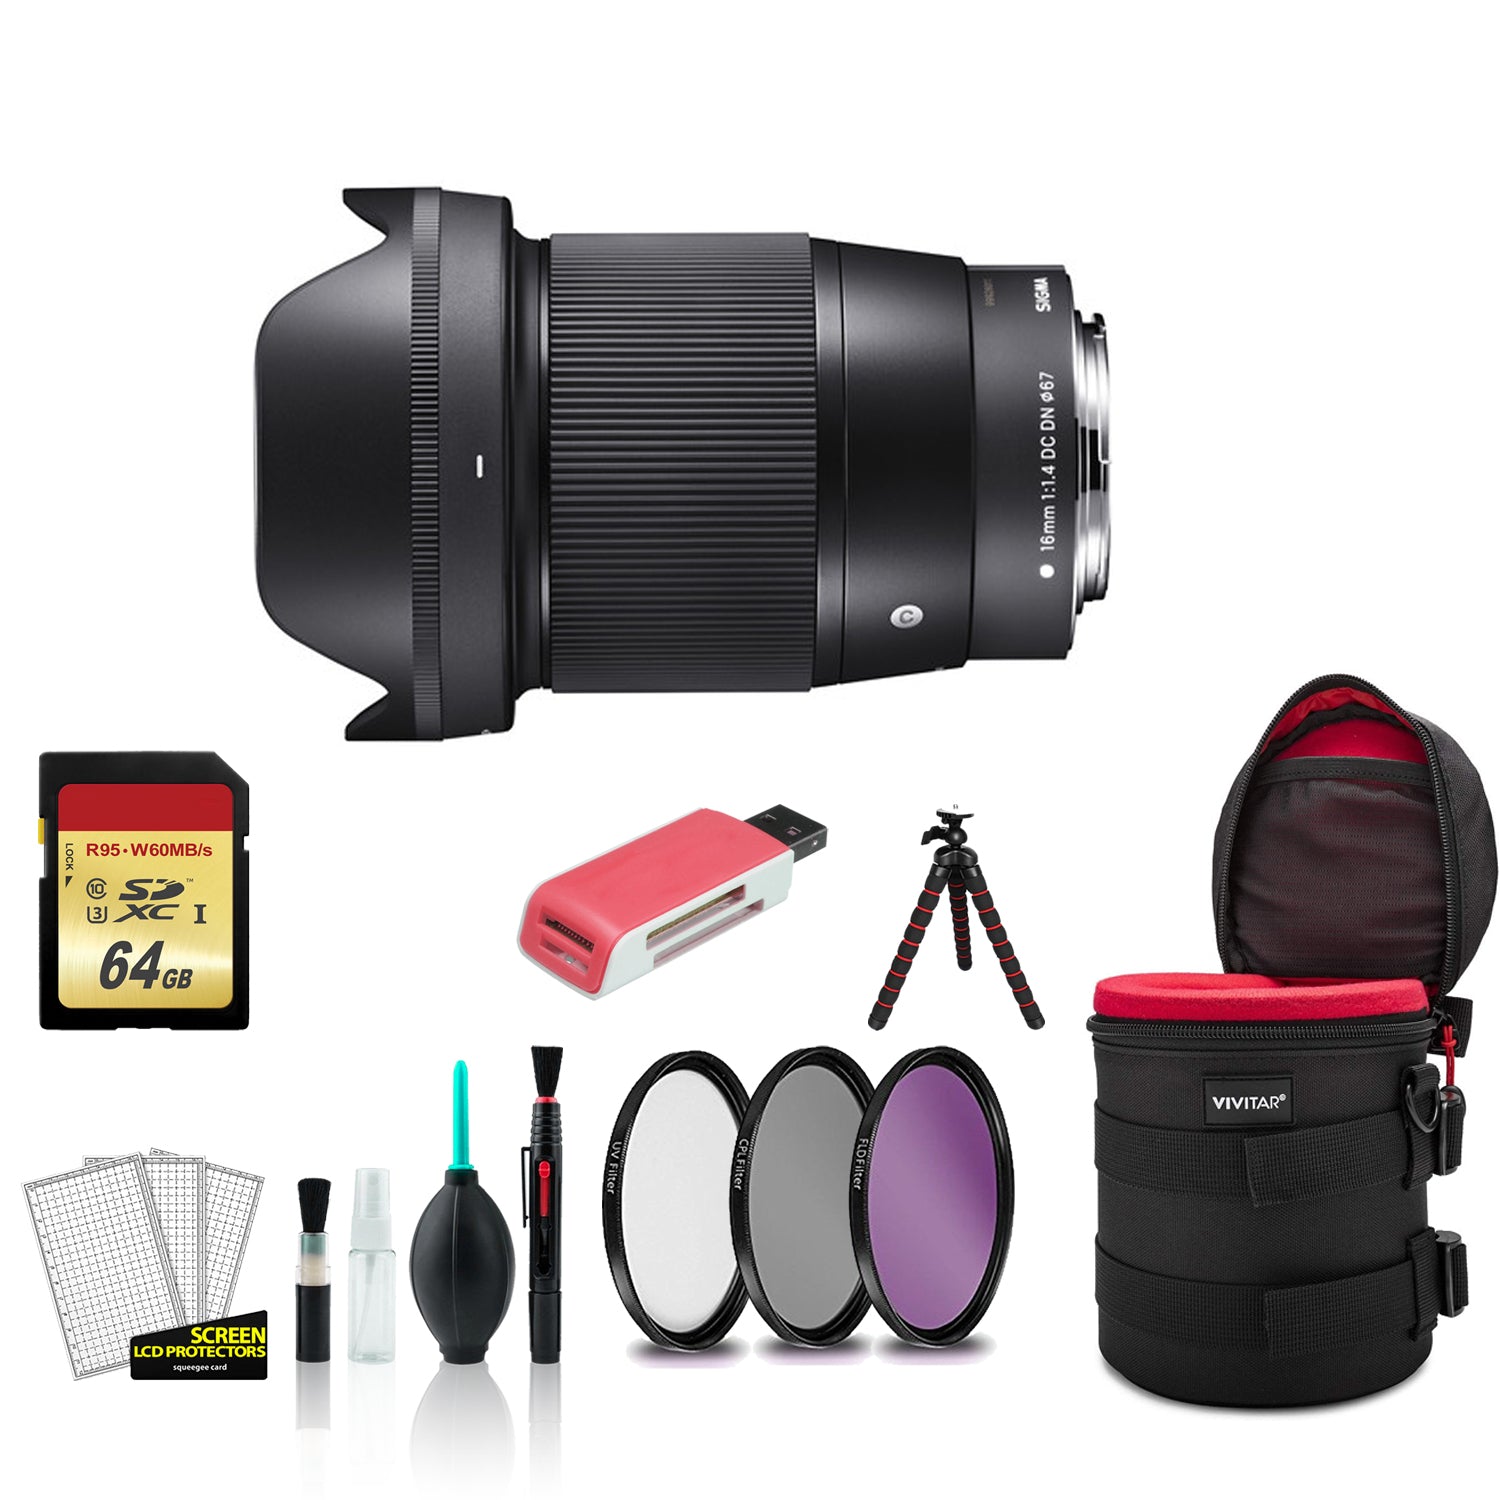 Sigma 16mm Contemporary Lens f/1.4 DC DN for Sony E 402965 with Filter Kit + 64GB Memory Card Bundle